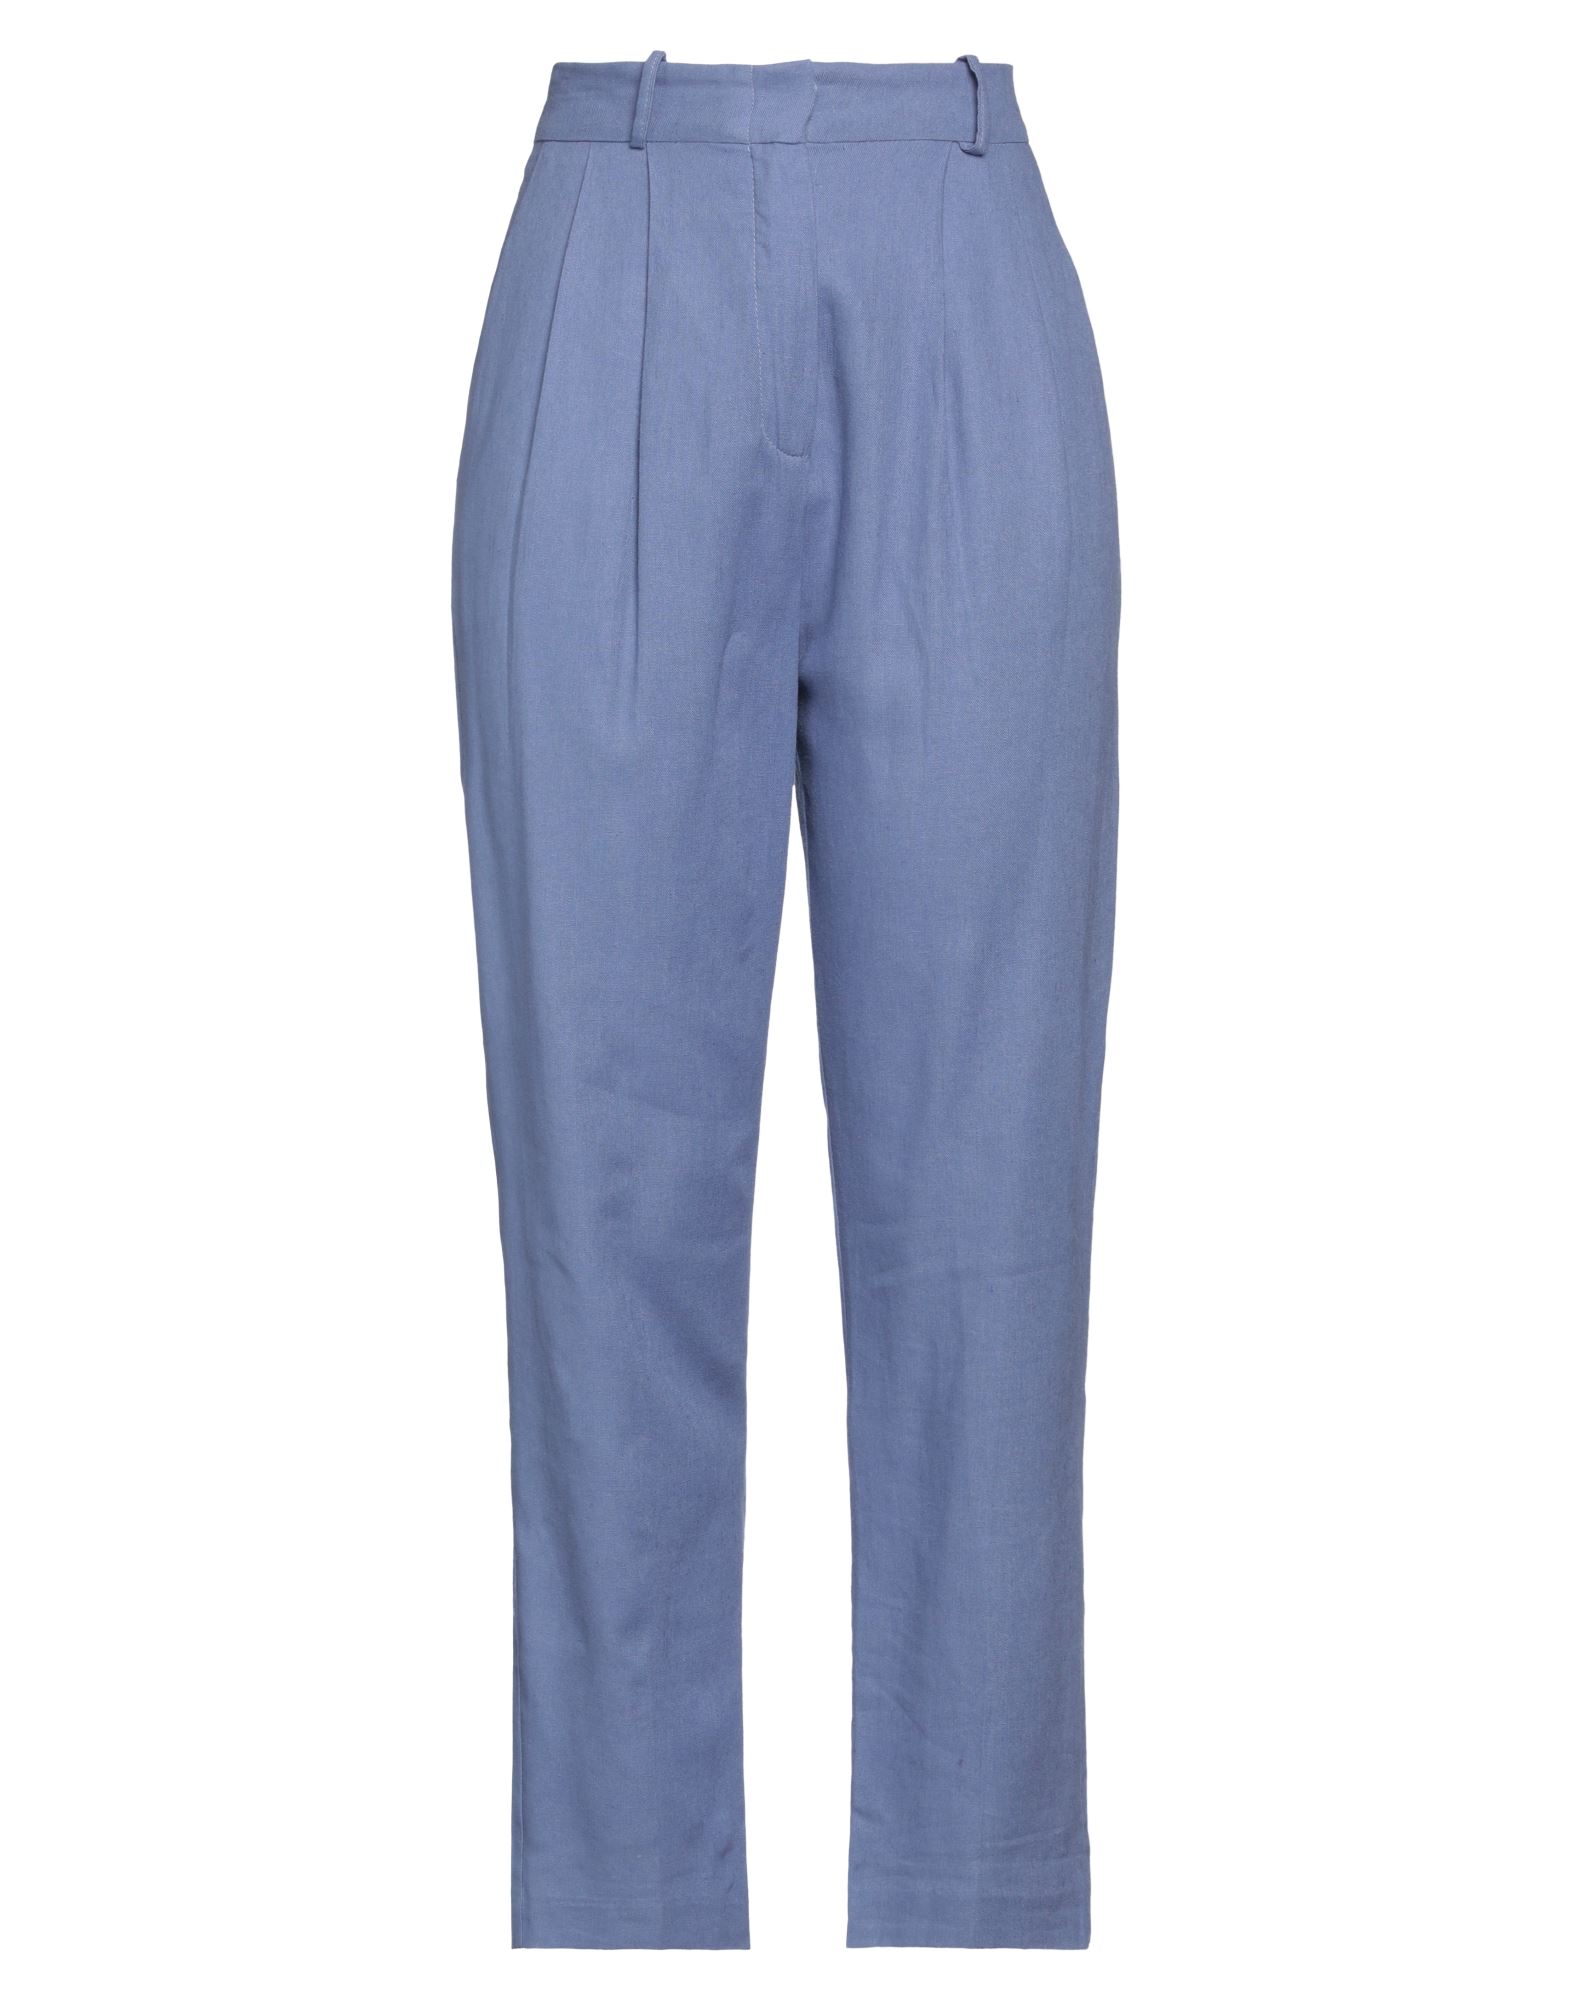 IMPERIAL IMPERIAL WOMAN PANTS SLATE BLUE SIZE S LINEN, VISCOSE